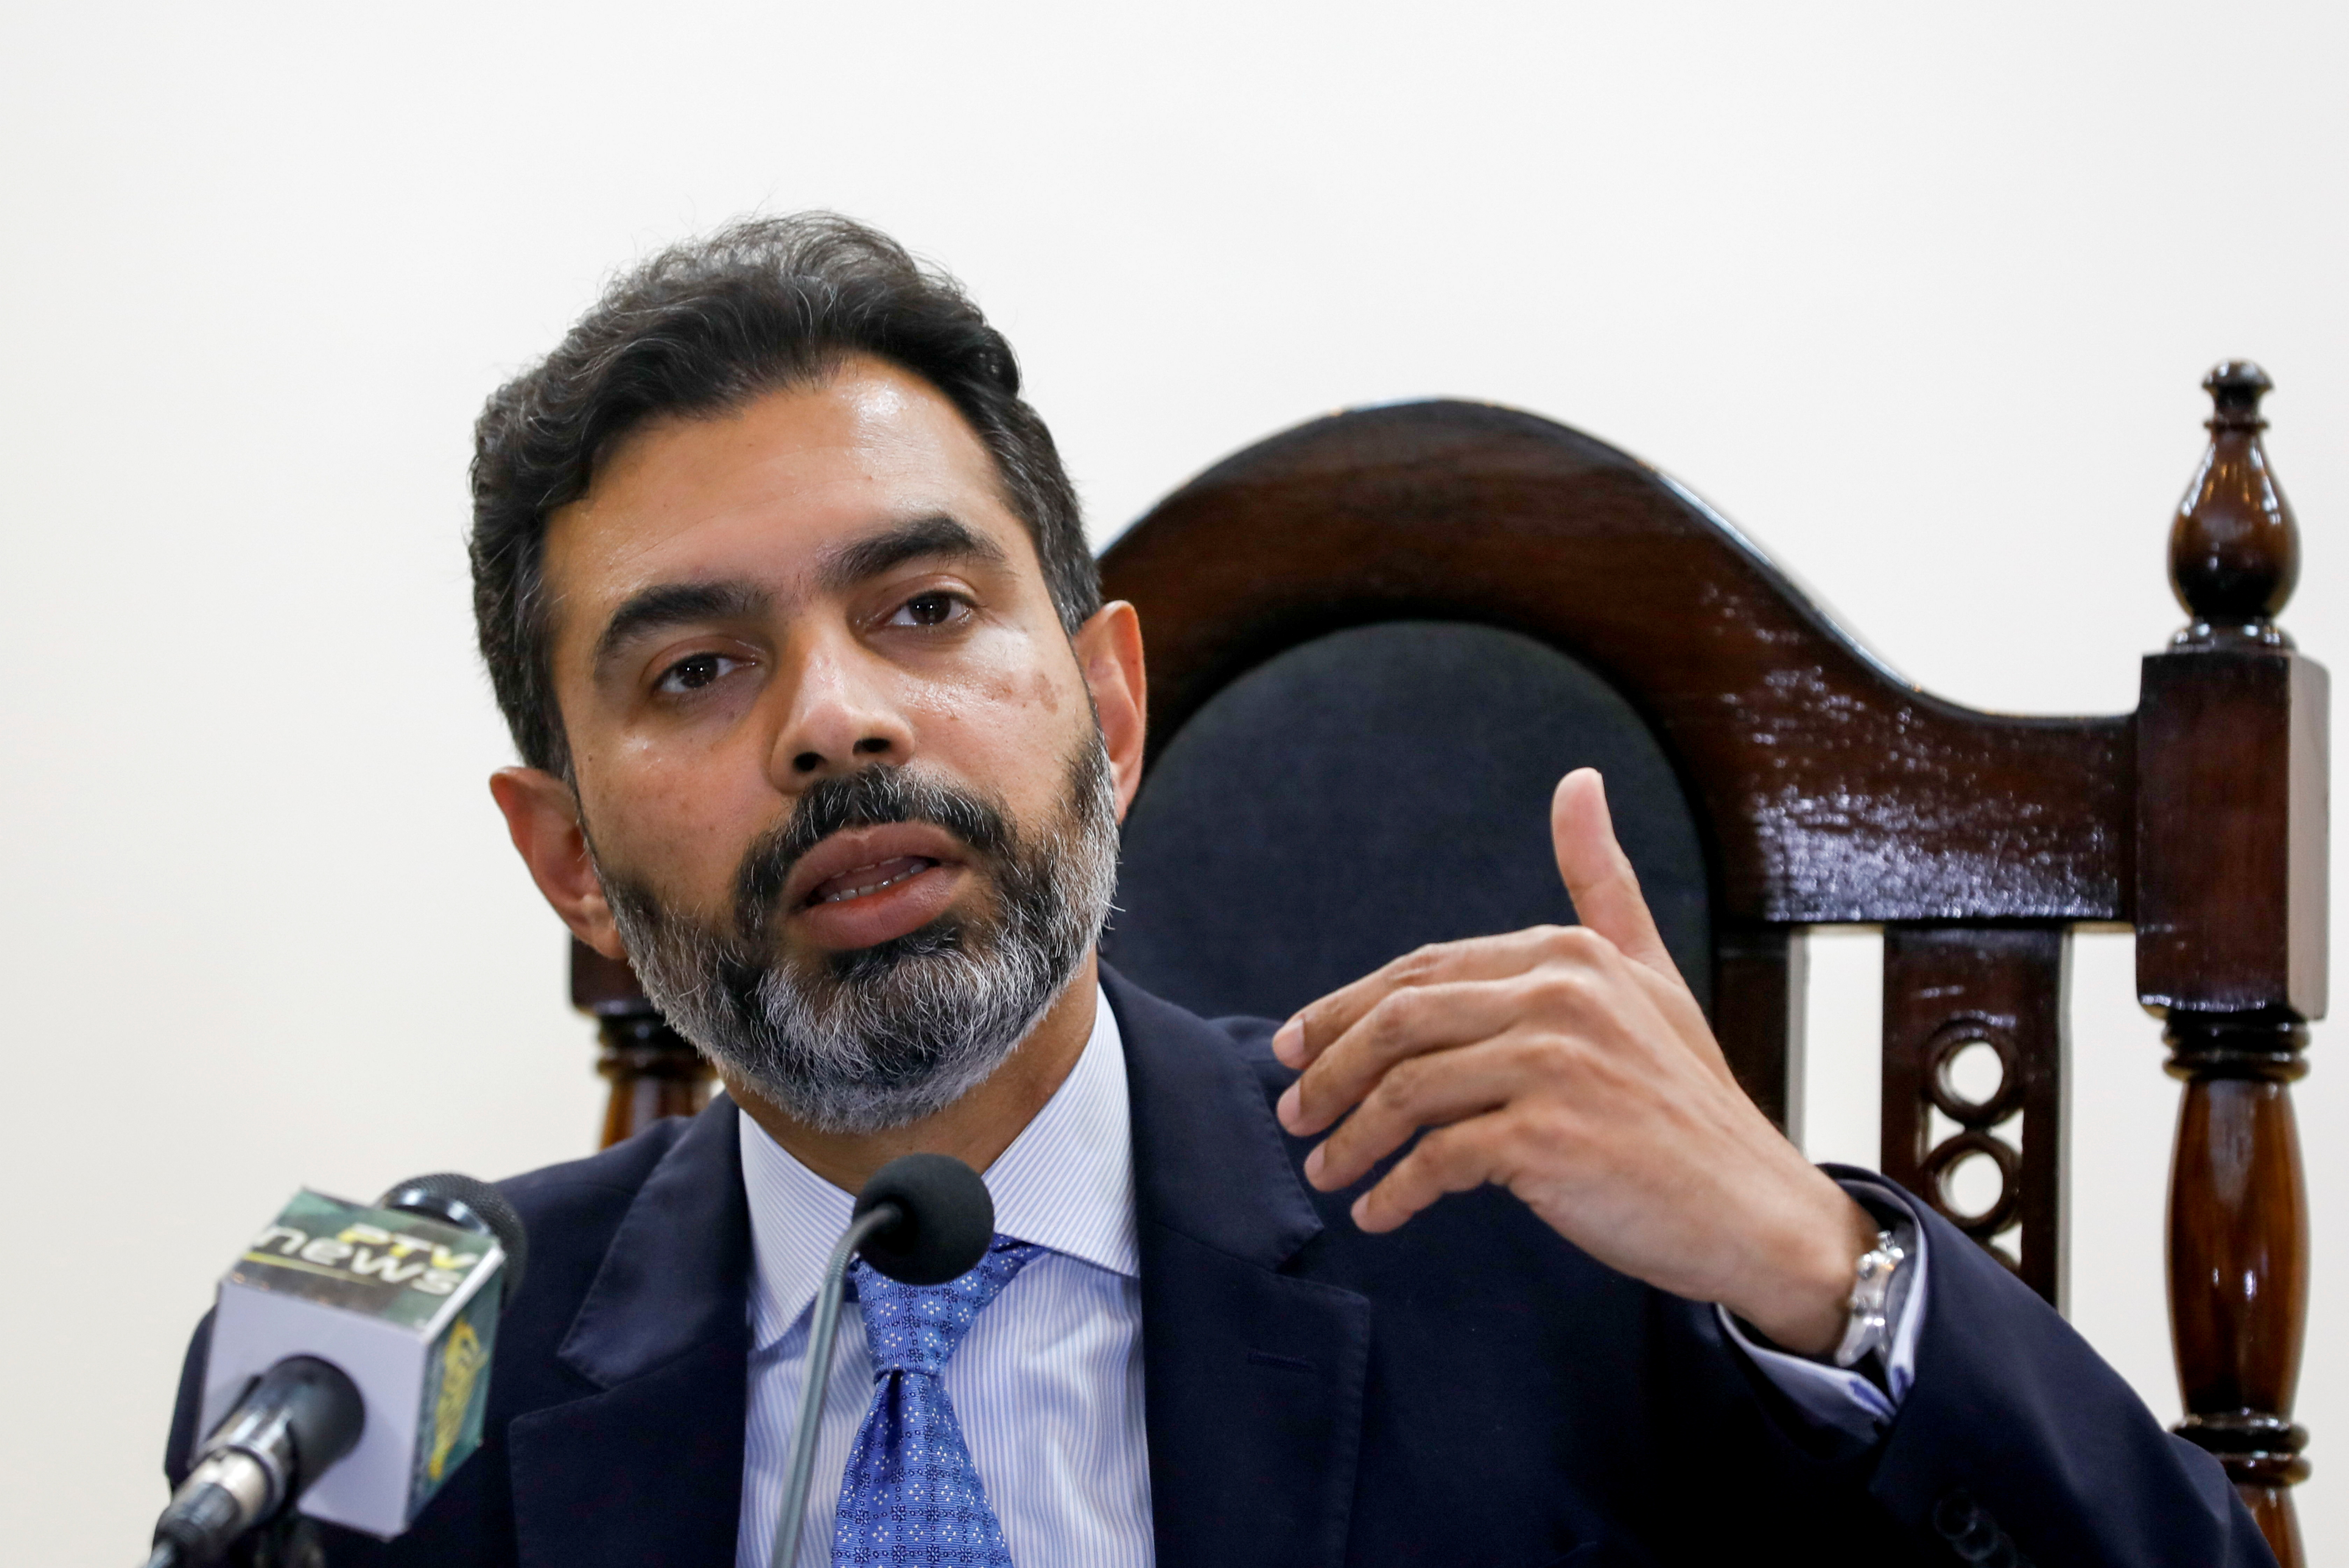 Reza Baqir, Governor of the State Bank of Pakistan (SBP), gestures during a news conference at the head office in Karachi, Pakistan January 22, 2021. REUTERS/Akhtar Soomro